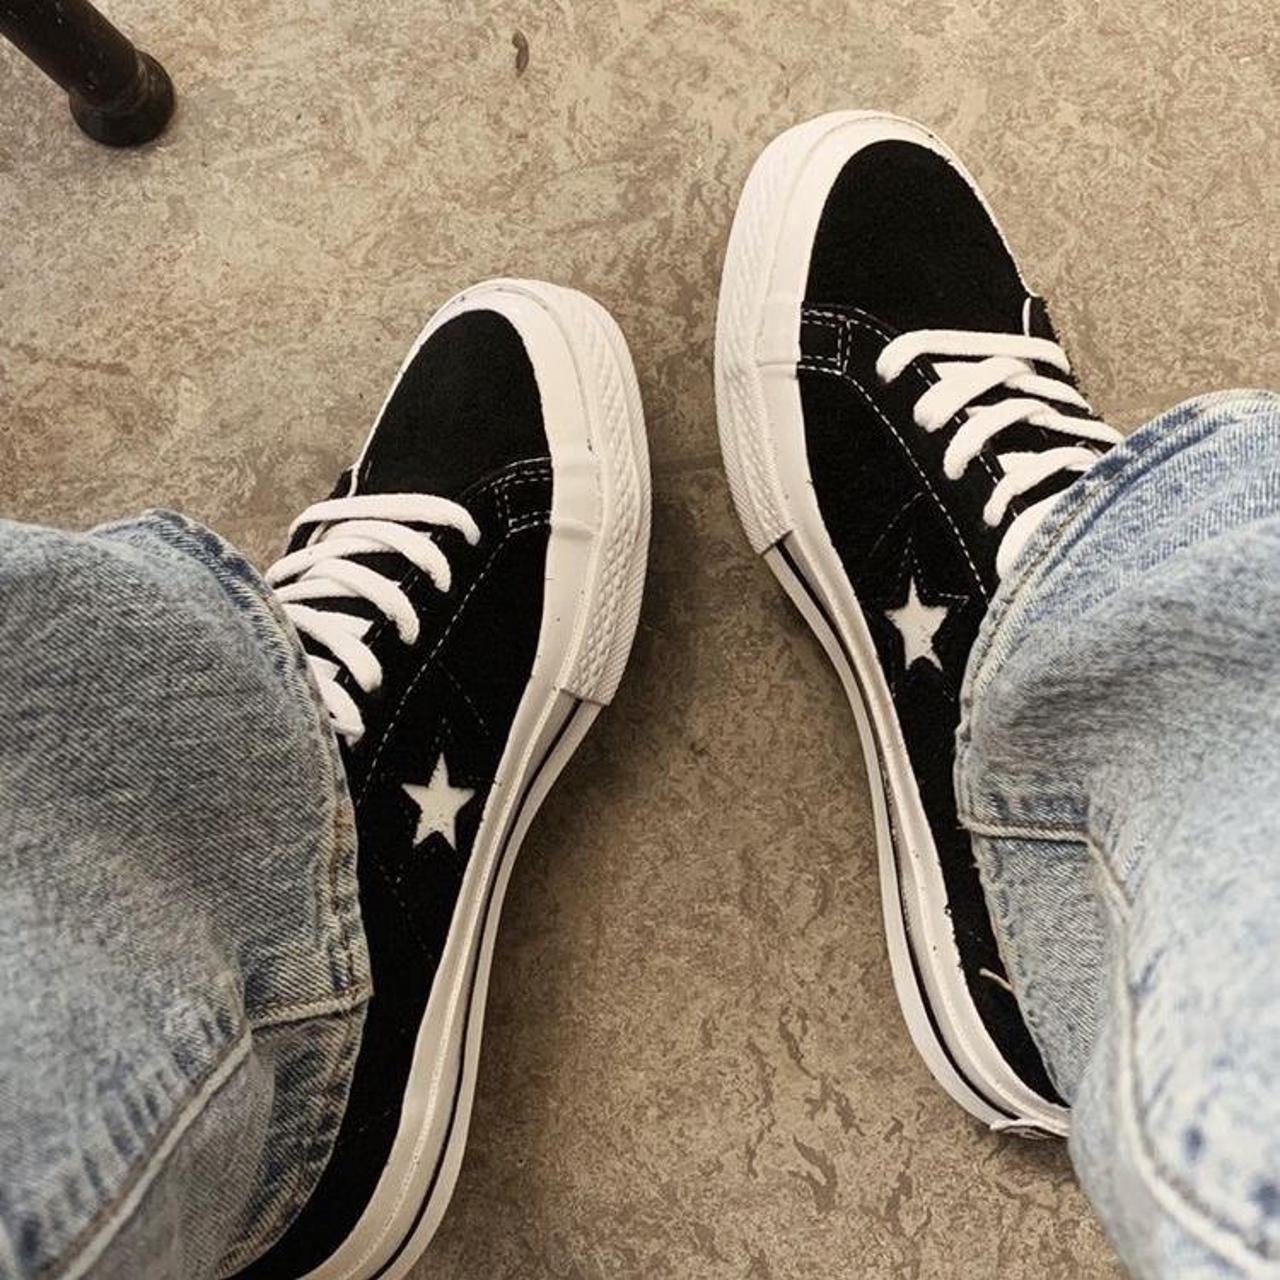 Converse Men's Black and White Trainers